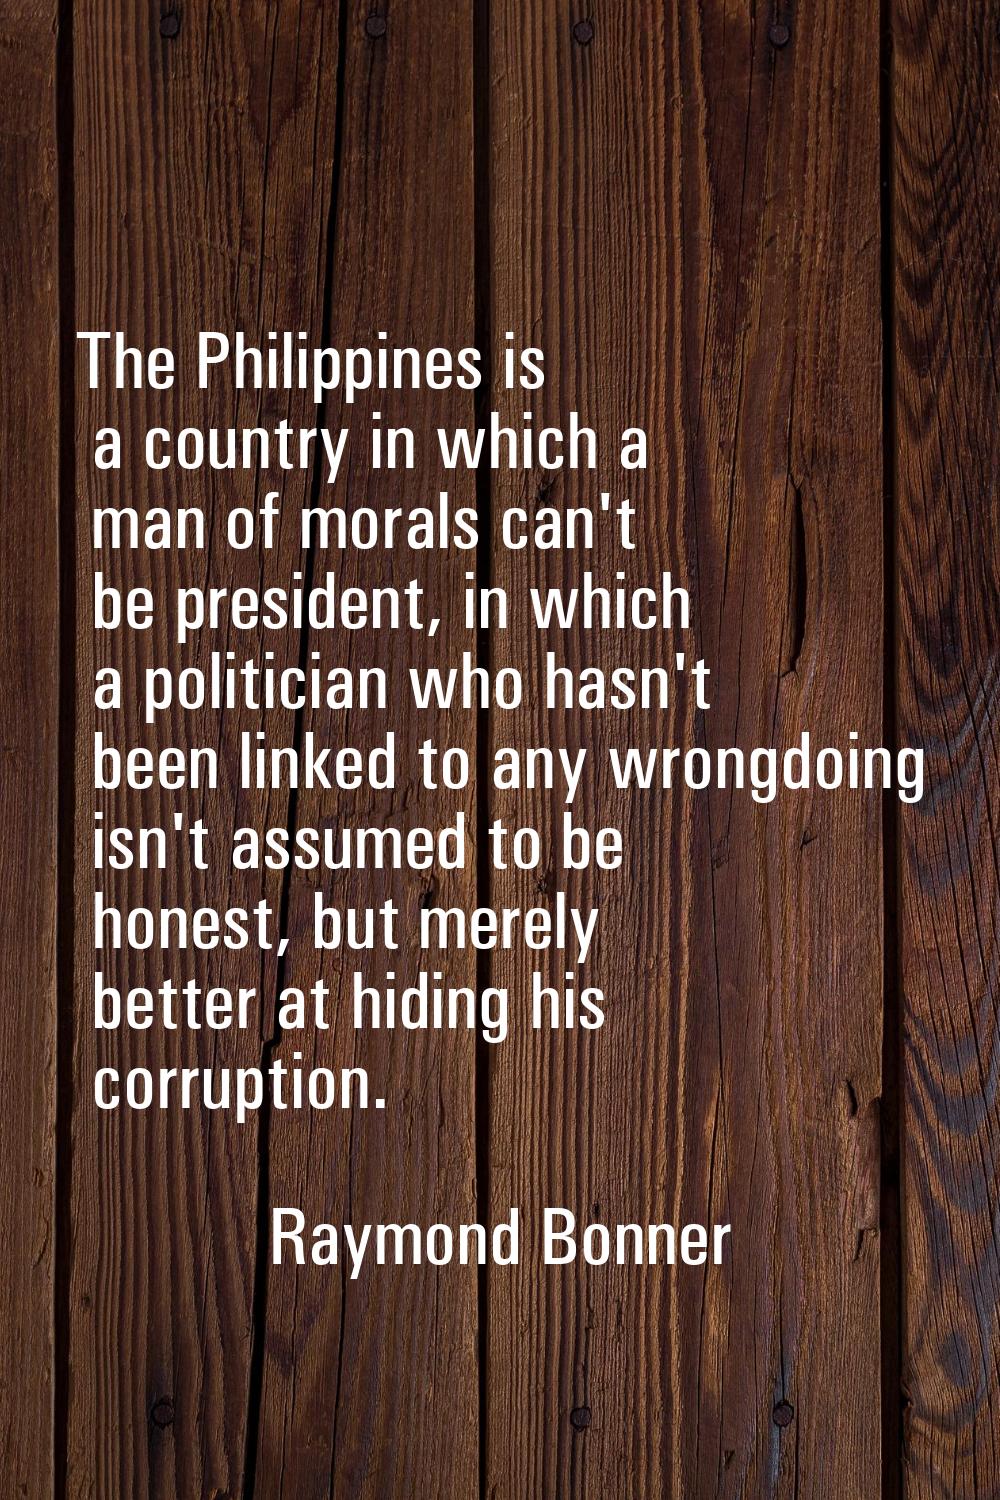 The Philippines is a country in which a man of morals can't be president, in which a politician who